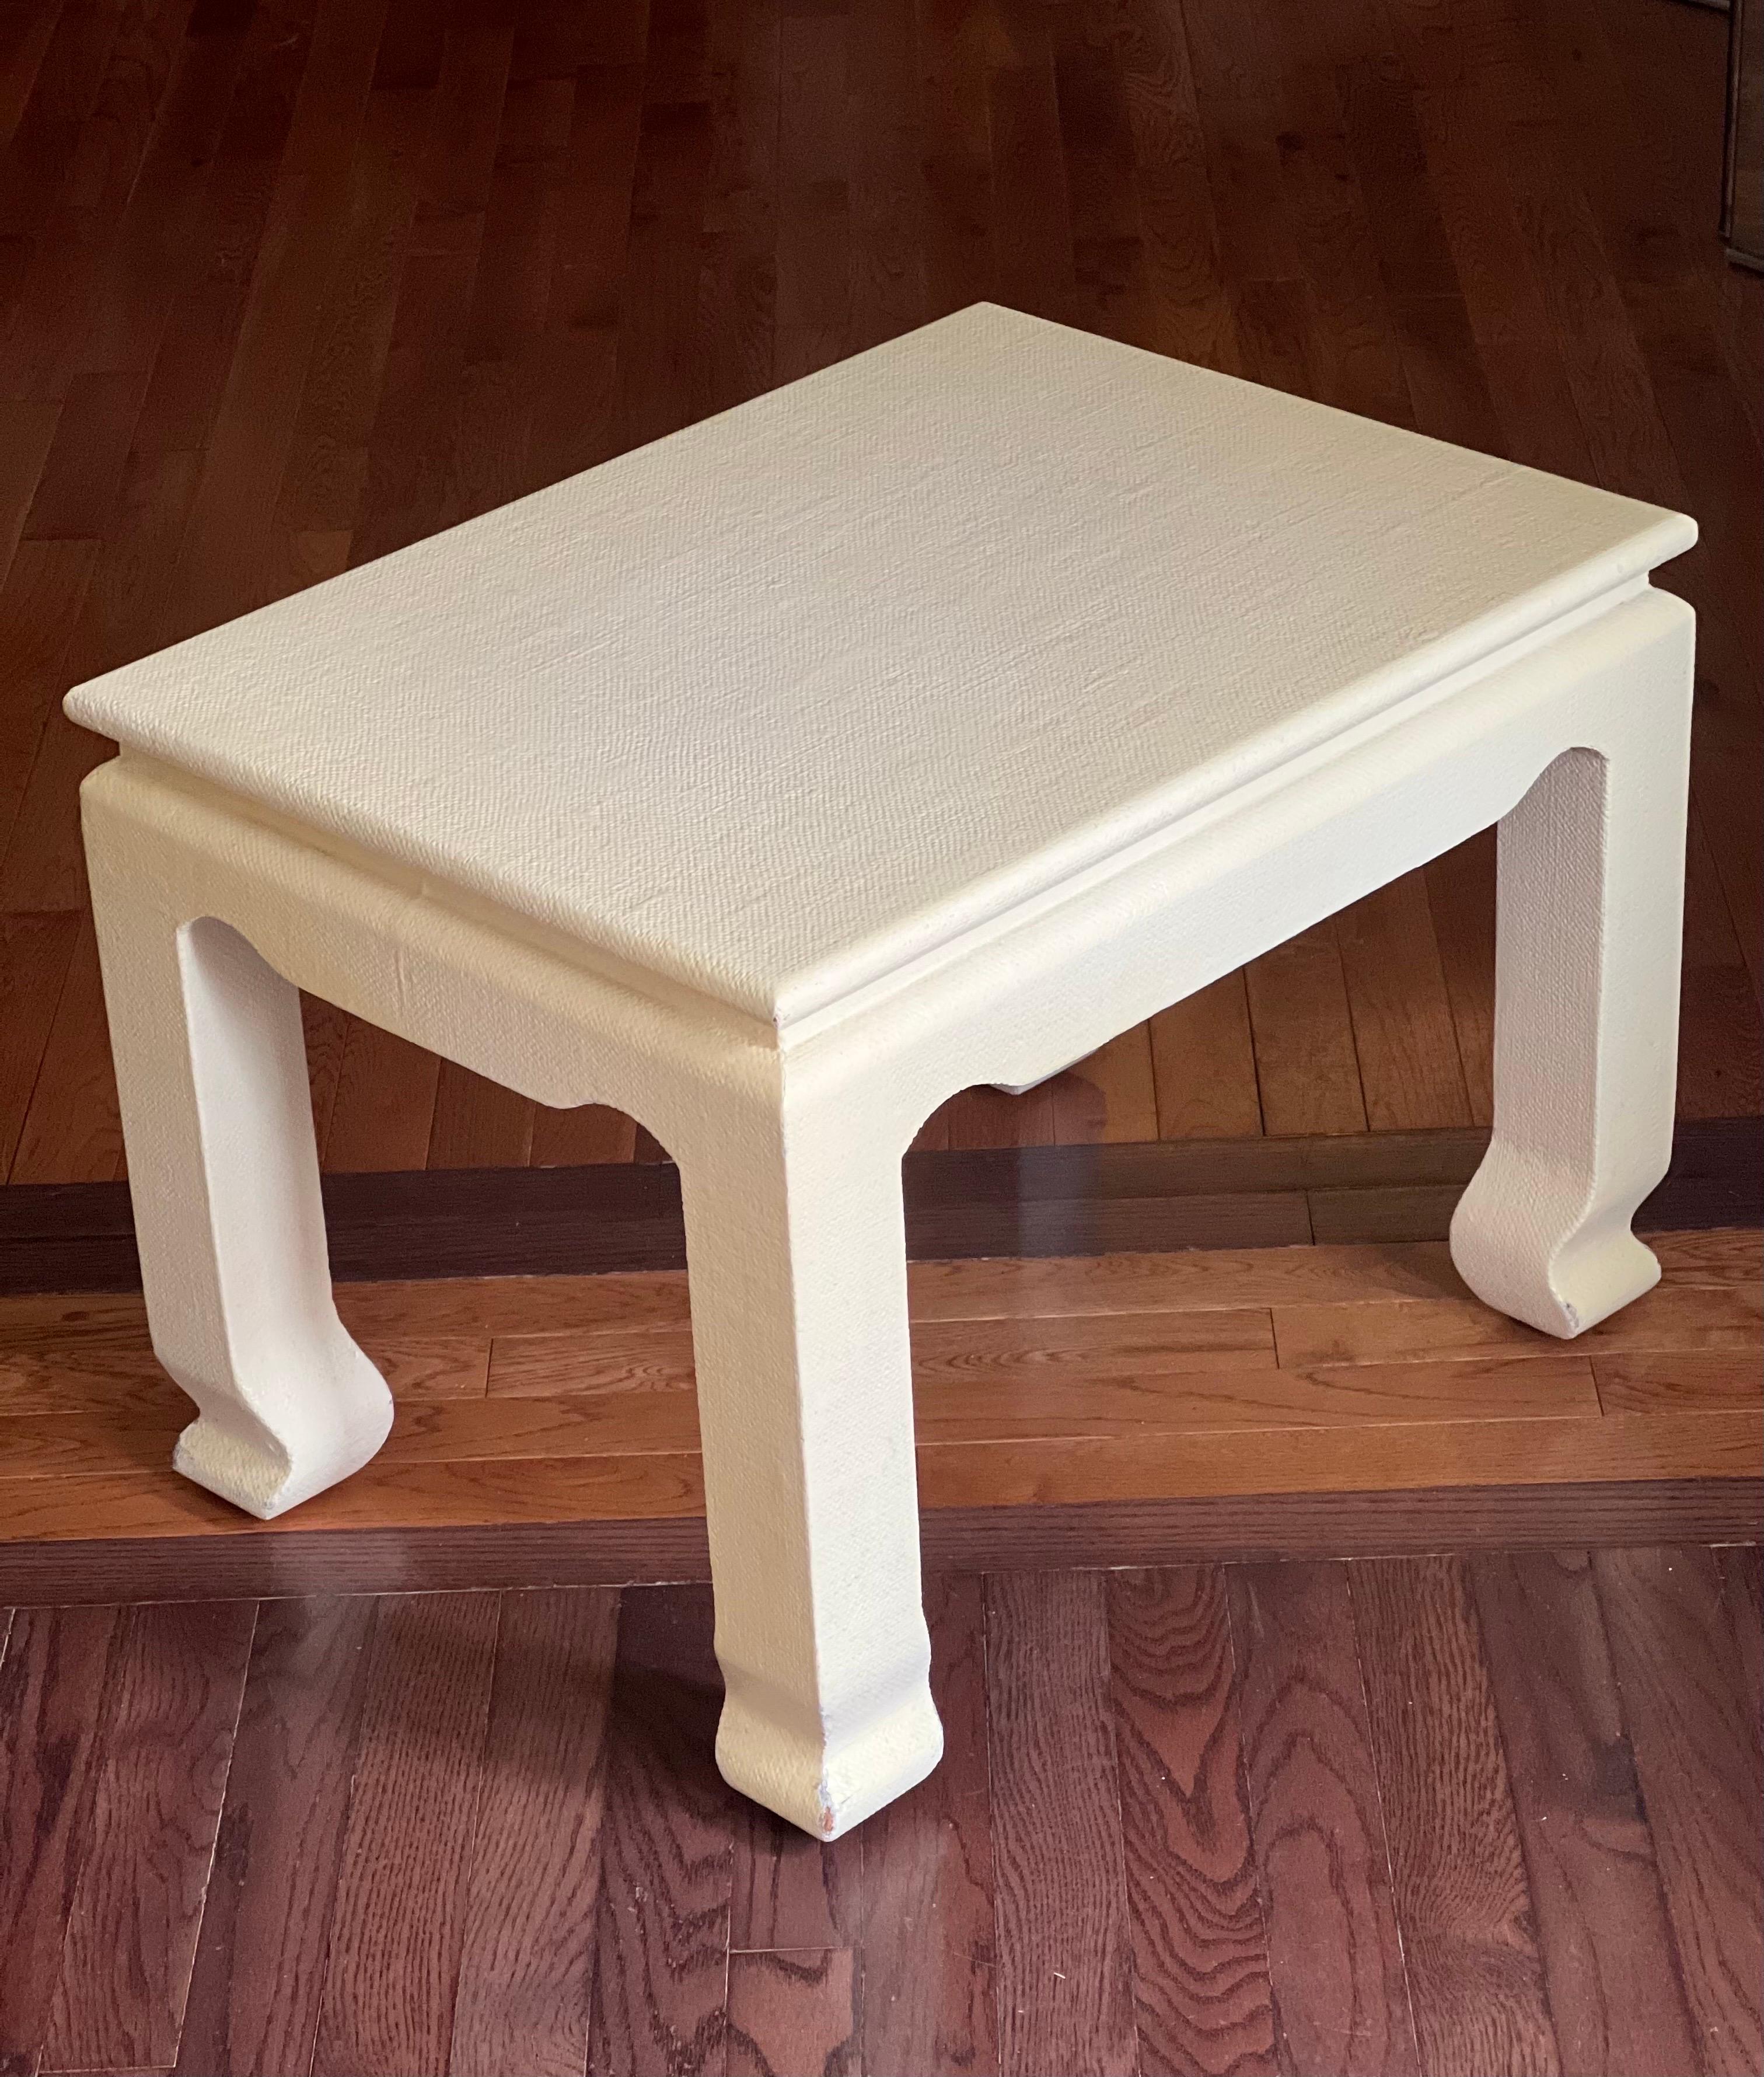 Fabulous vintage canvas wrapped Ming style side table, attributed to Karl Springer, 1970's. The table is a vibrant shade of cream with nice texture. Iconic, classic Karl Springer stye.